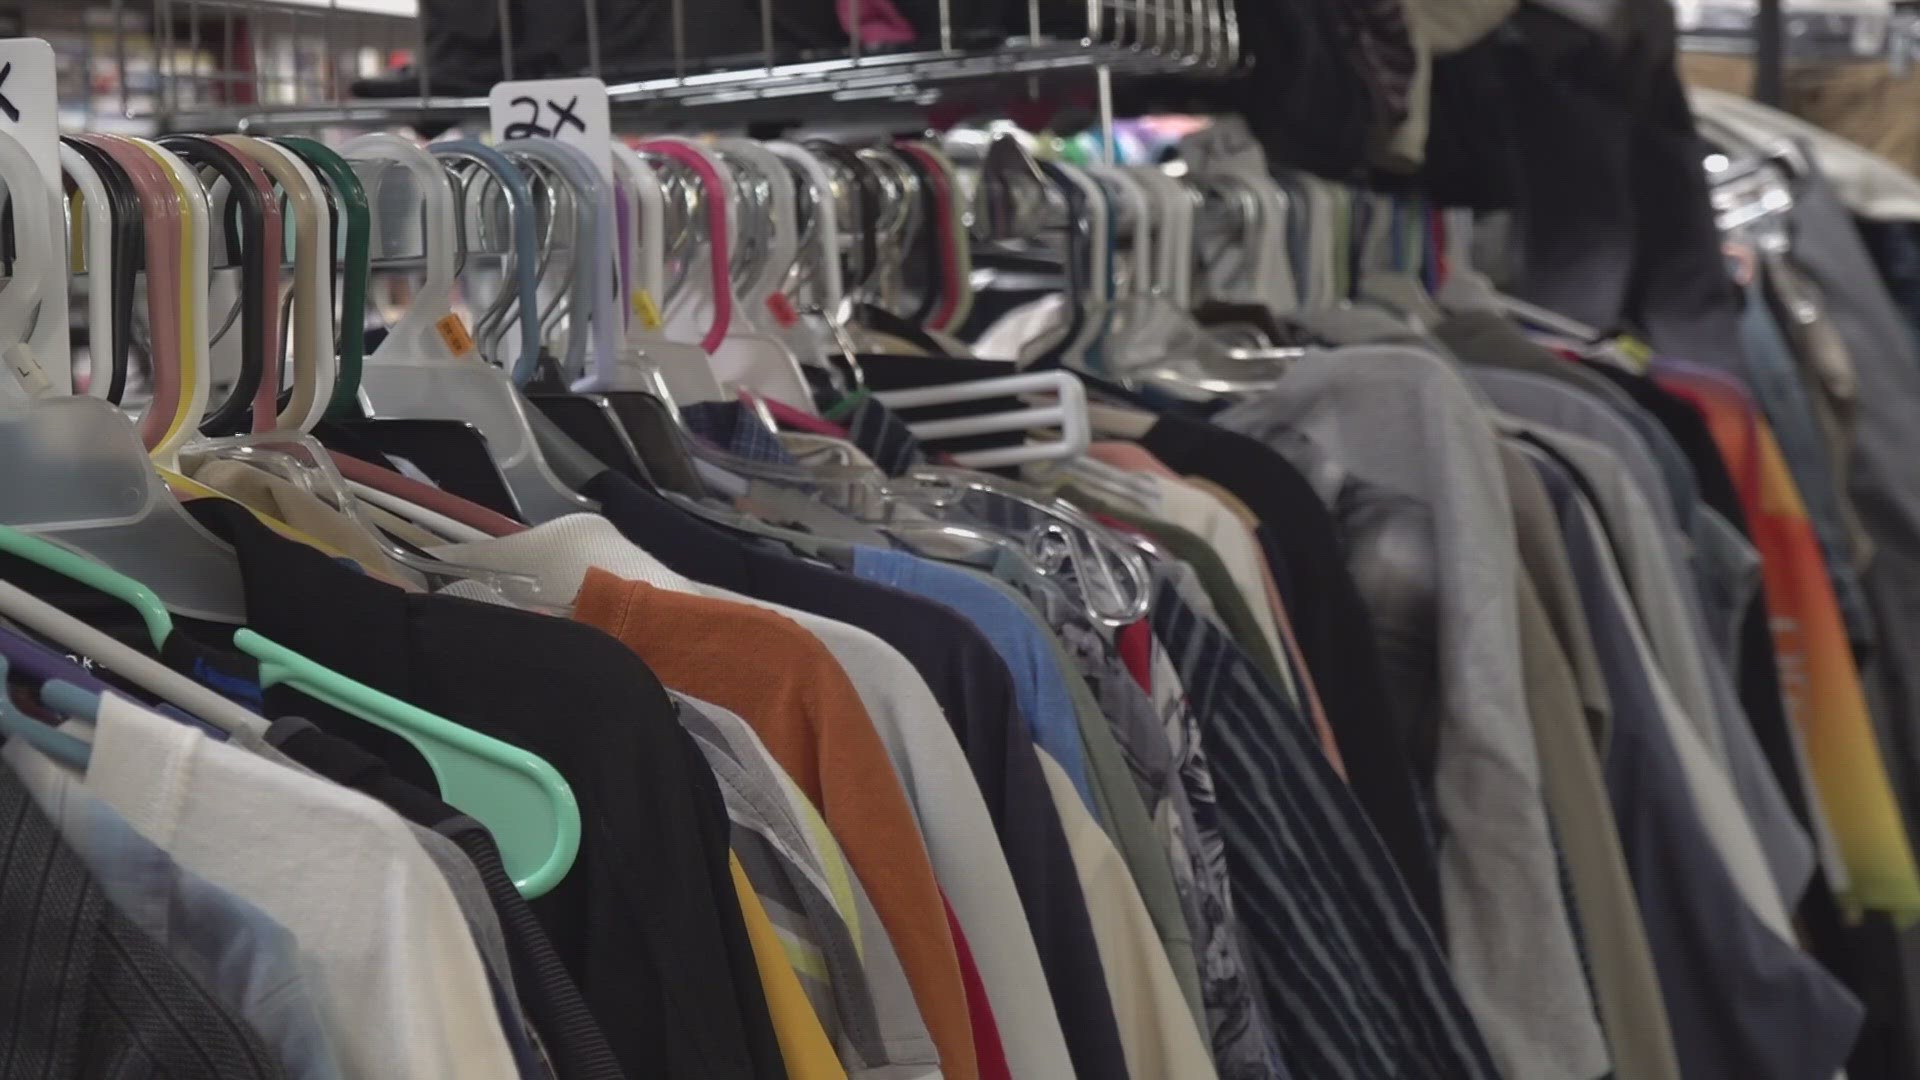 An unexpected lease termination has led the thrift store to look for a new home.